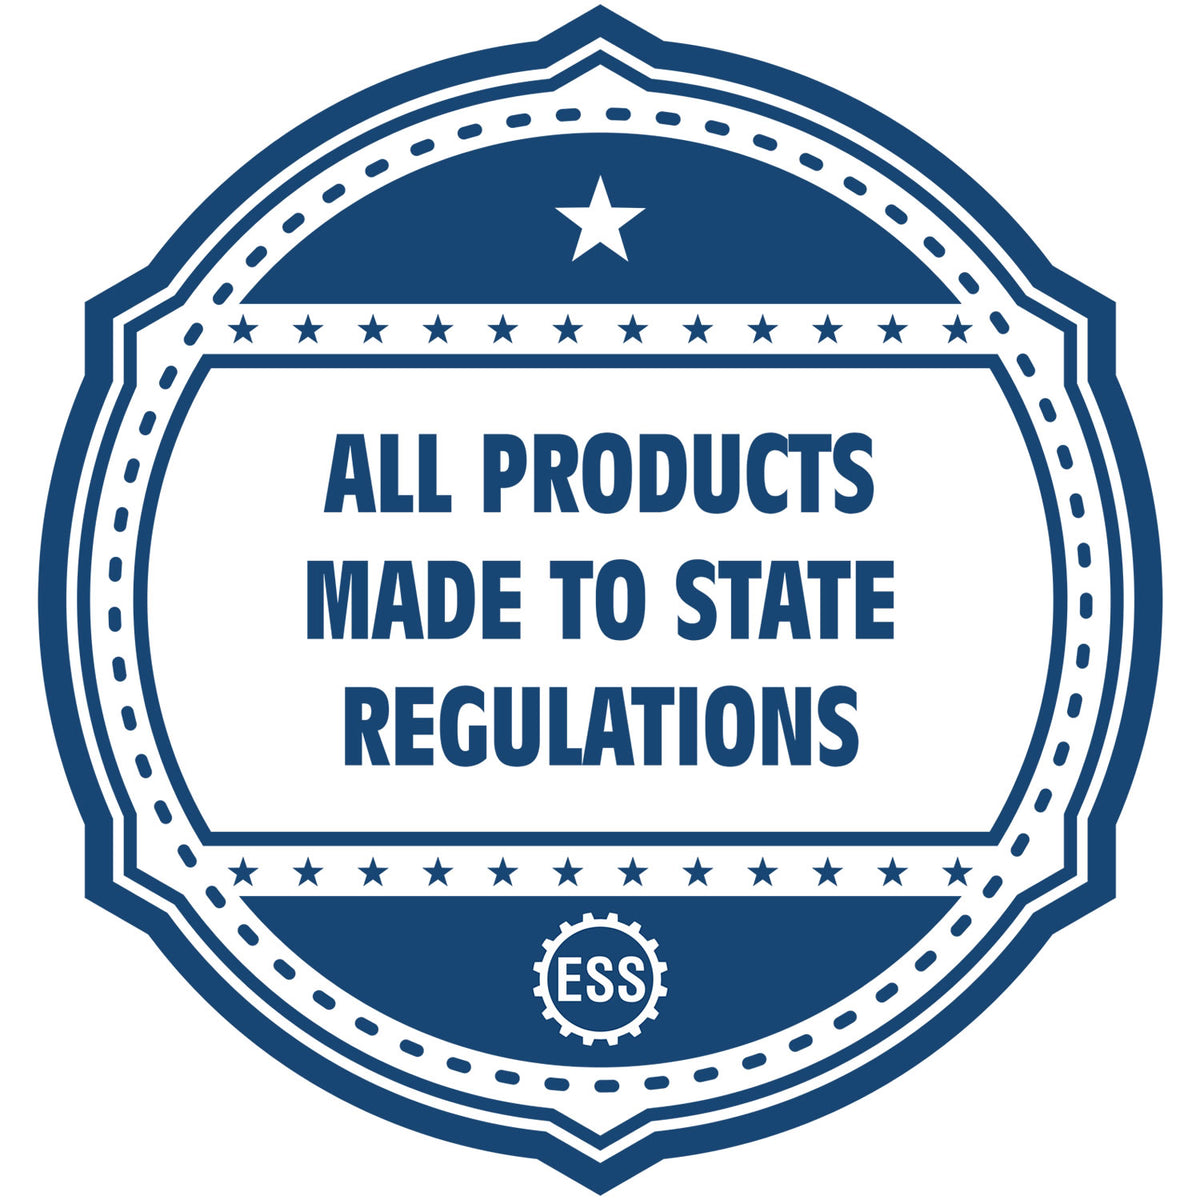 An icon or badge element for the Slim Pre-Inked Mississippi Architect Seal Stamp showing that this product is made in compliance with state regulations.